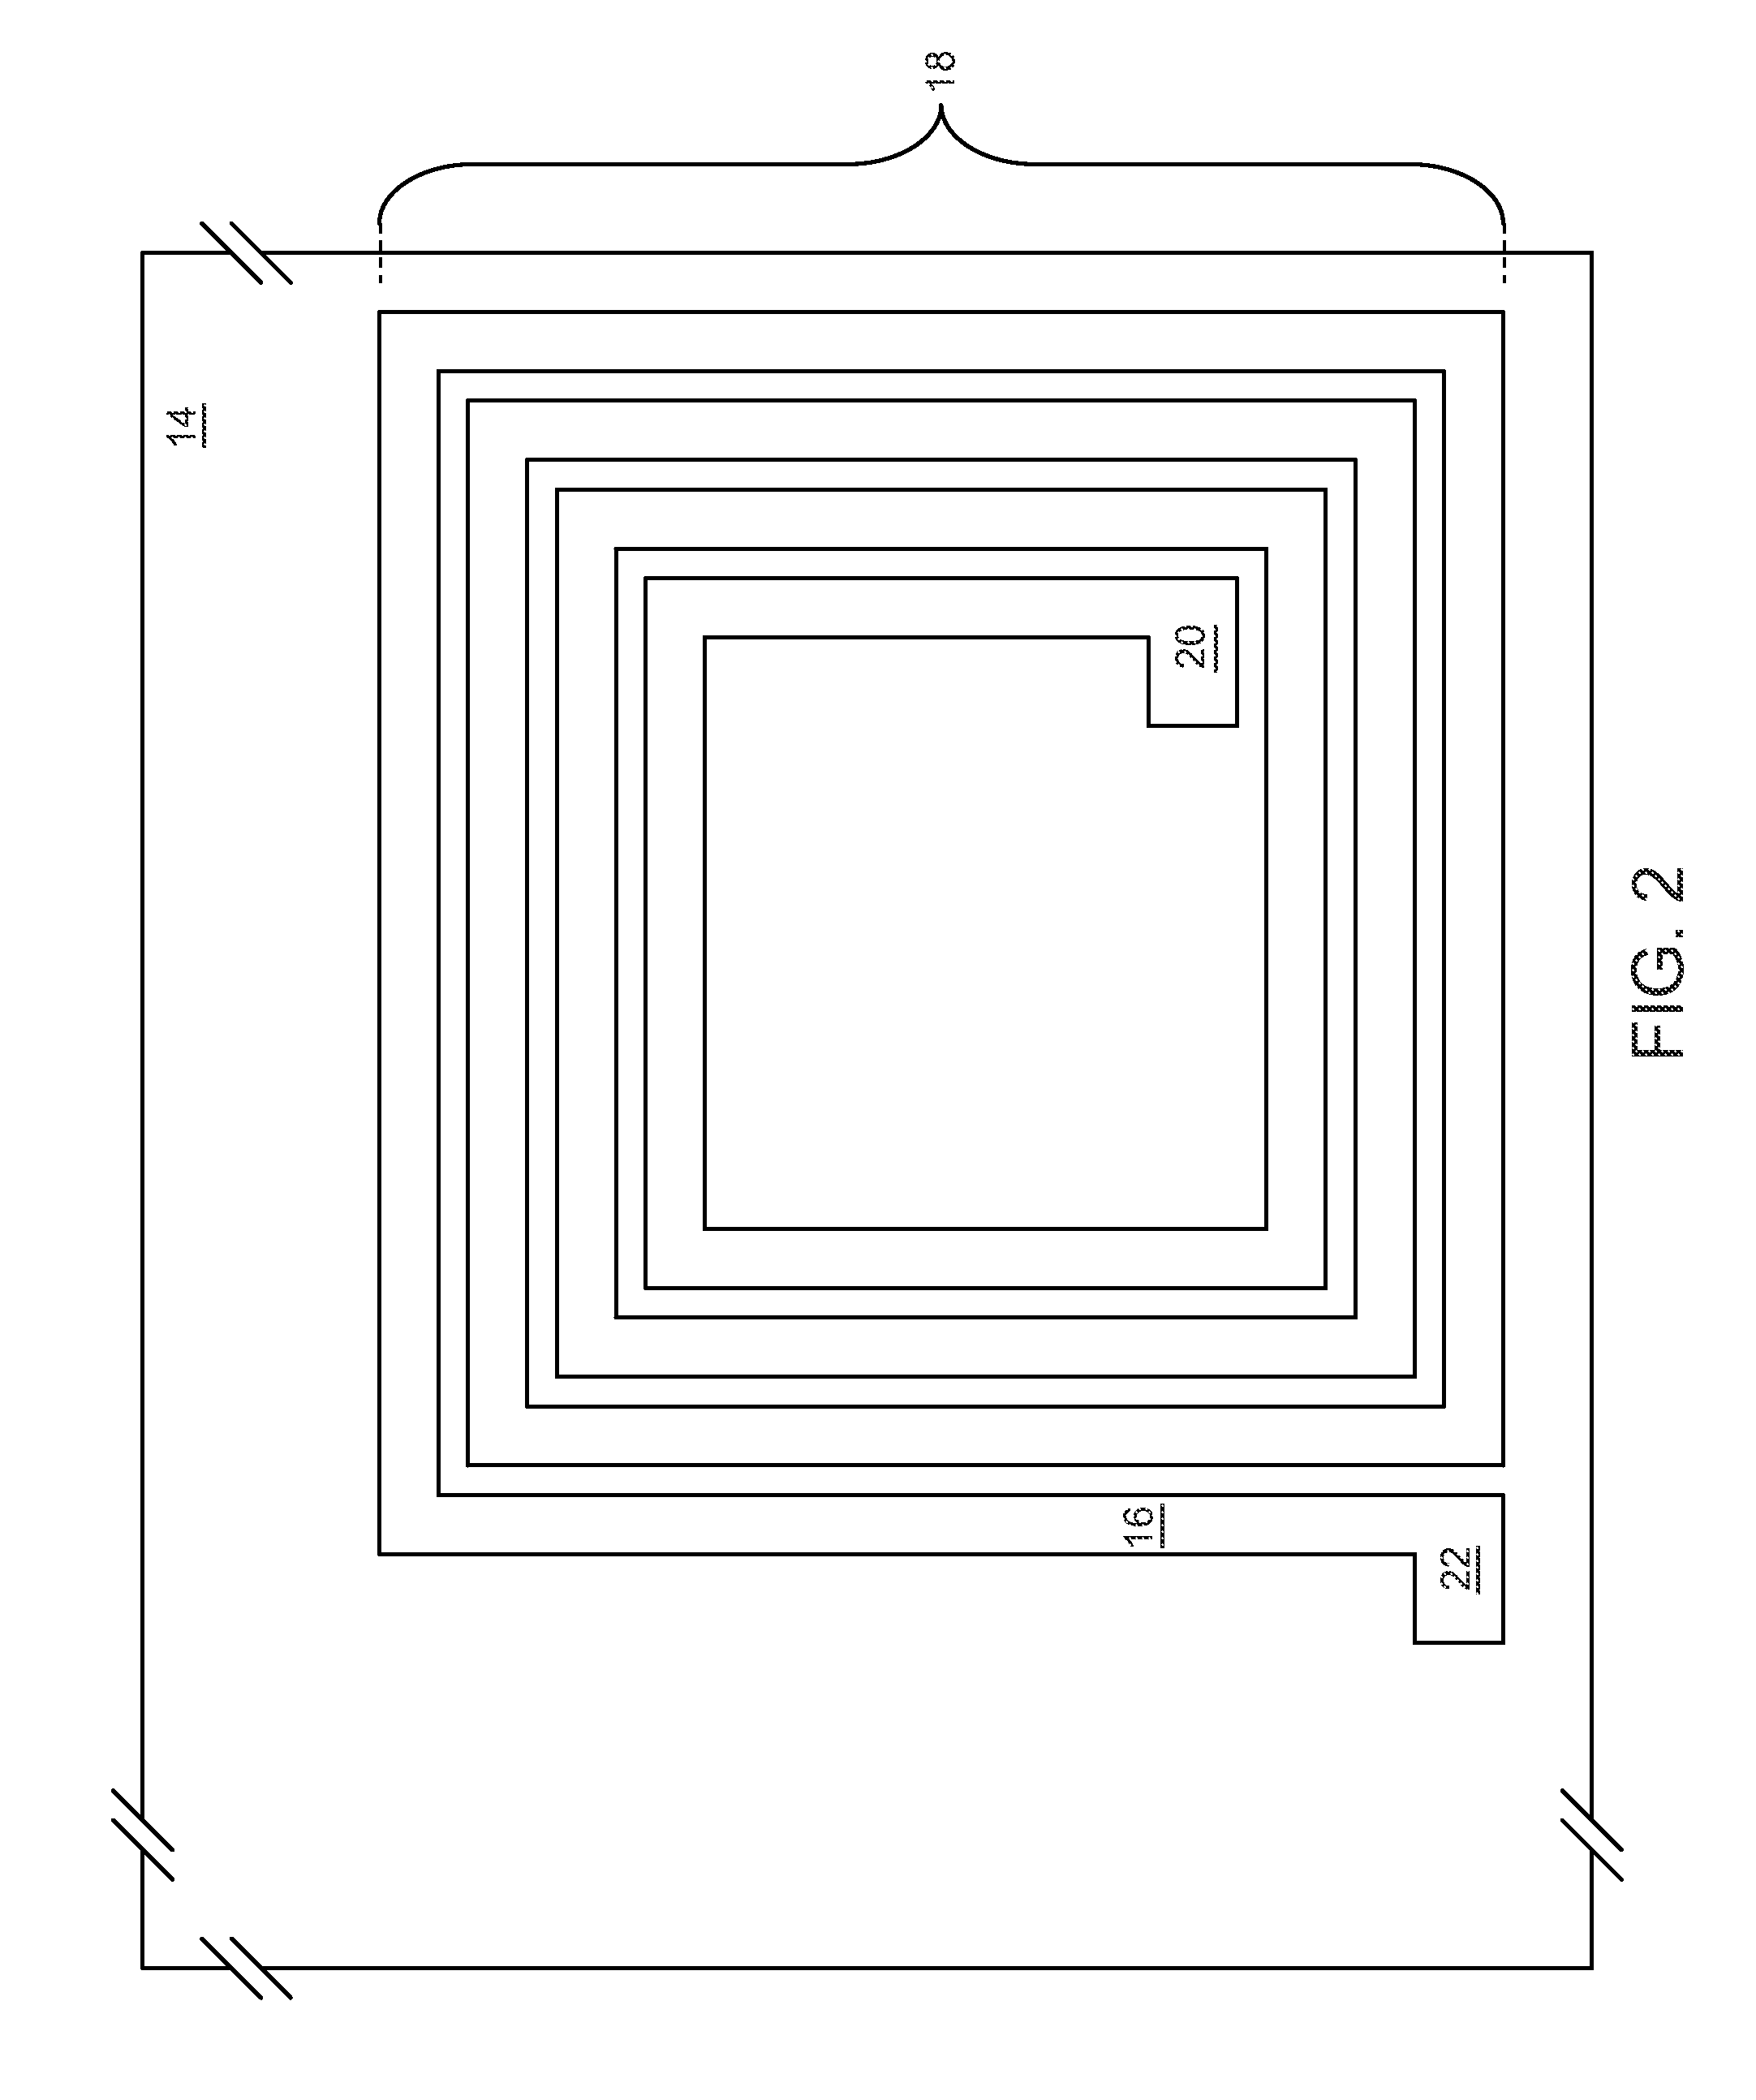 Linearity improvements of semiconductor substrate based radio frequency devices